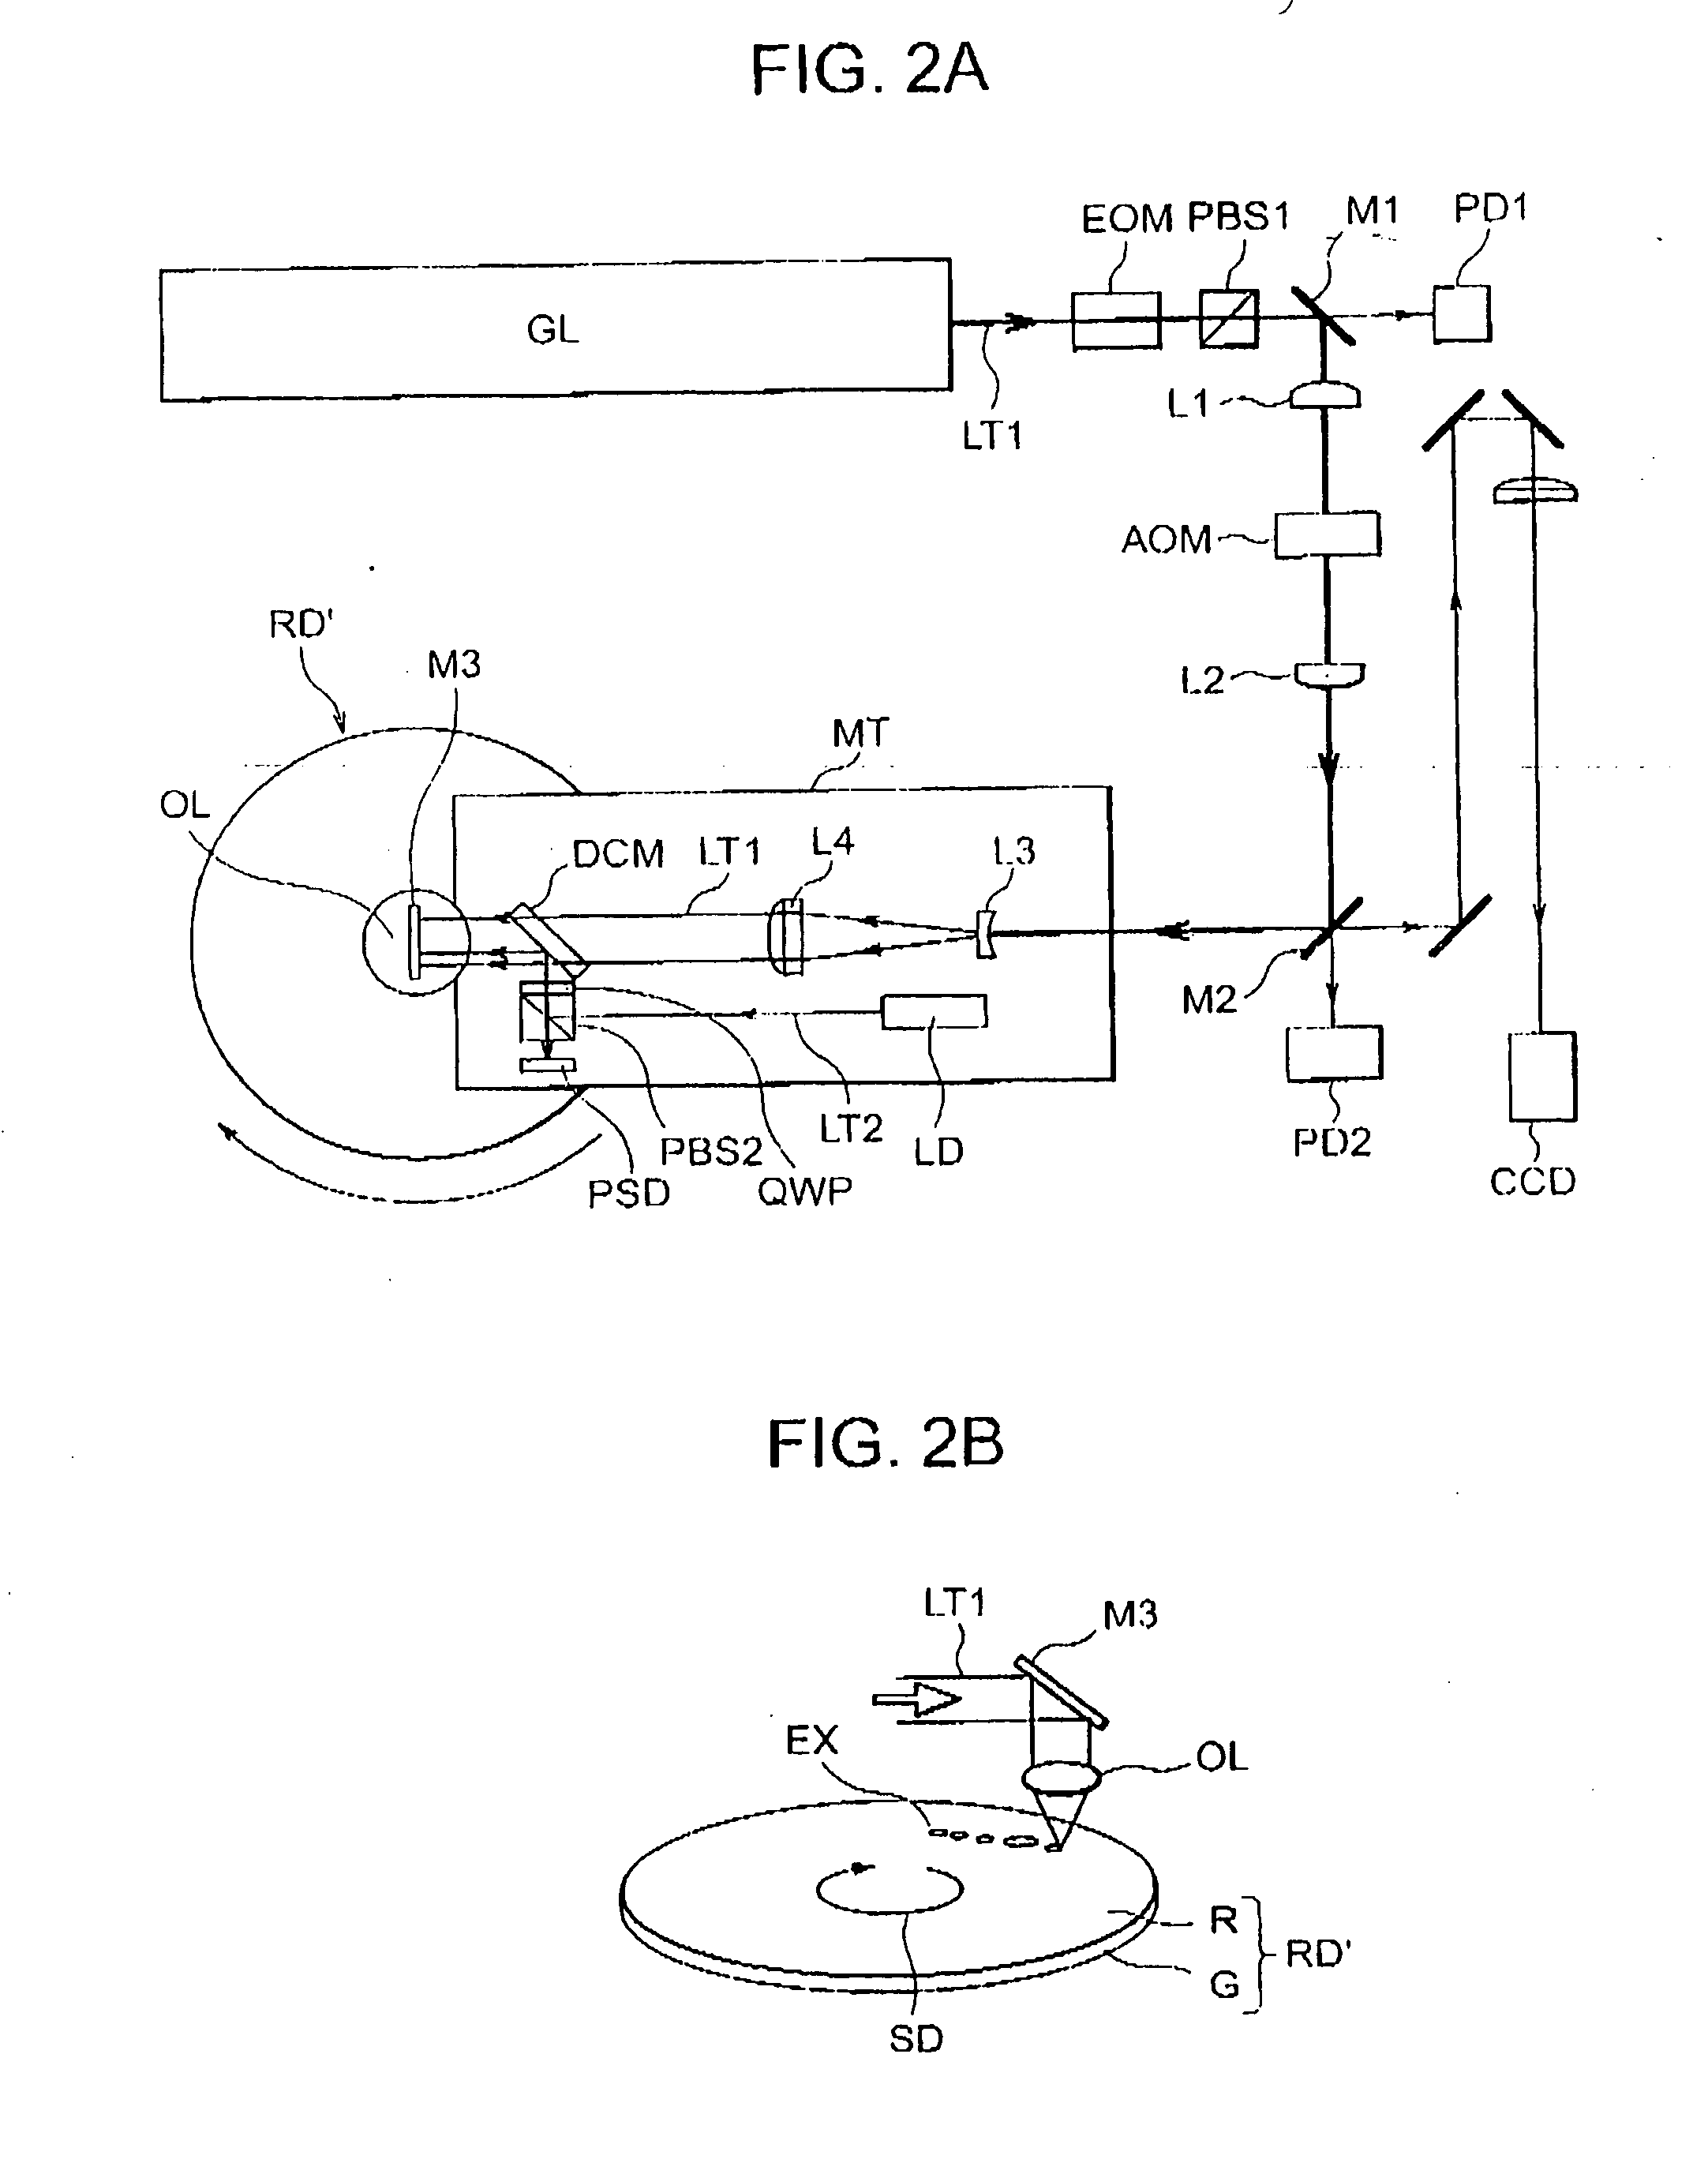 Stamper for producing optical recording medium, optical recording medium, and methods of producing the same